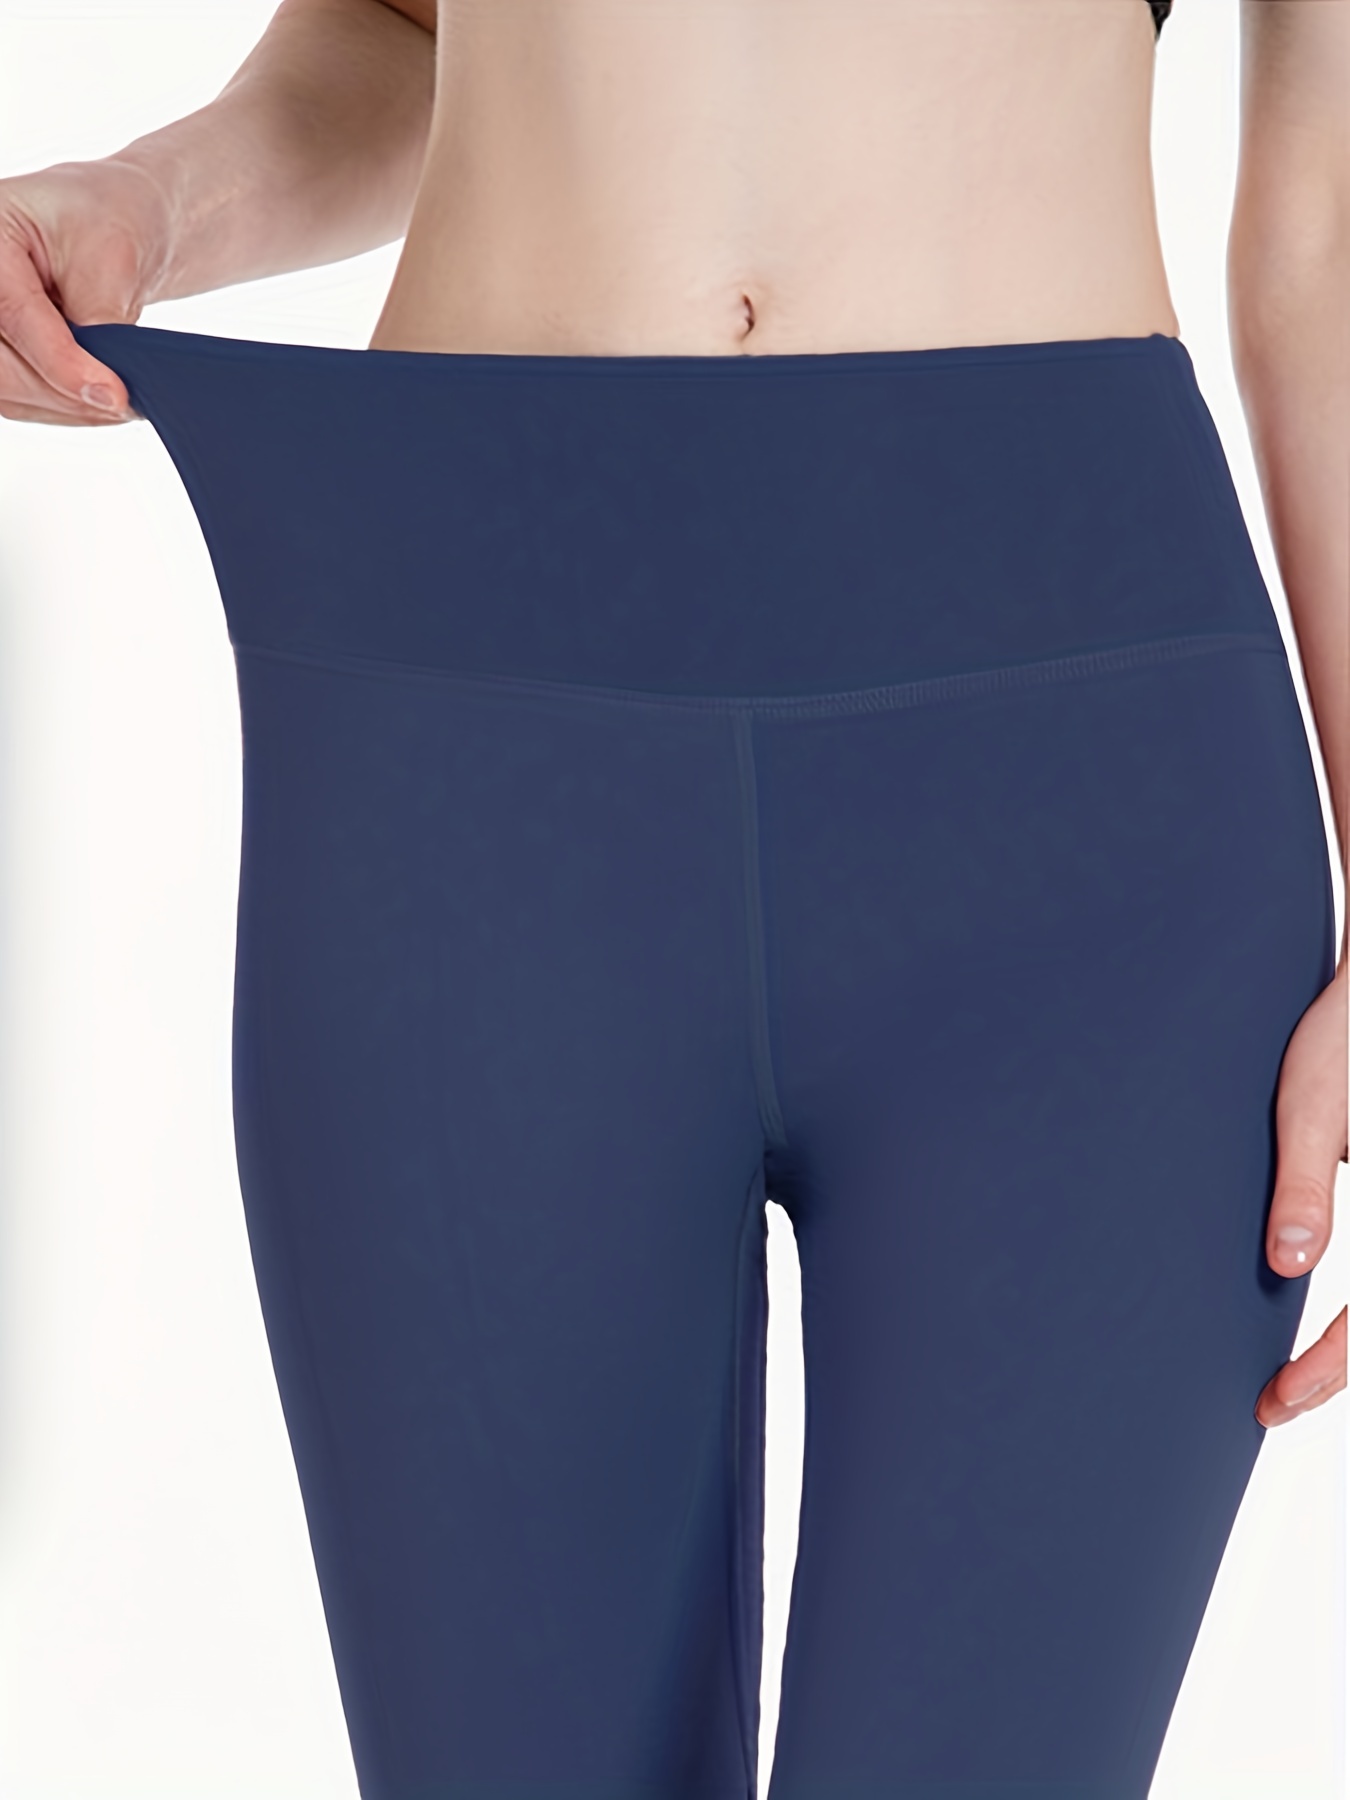 PHISOCKAT High Waist Capris Yoga Pants with Pockets, Tummy Control Workout  4 Way Stretch Capris Yoga Leggings (Capris Blue, Small): Buy Online at Best  Price in UAE 